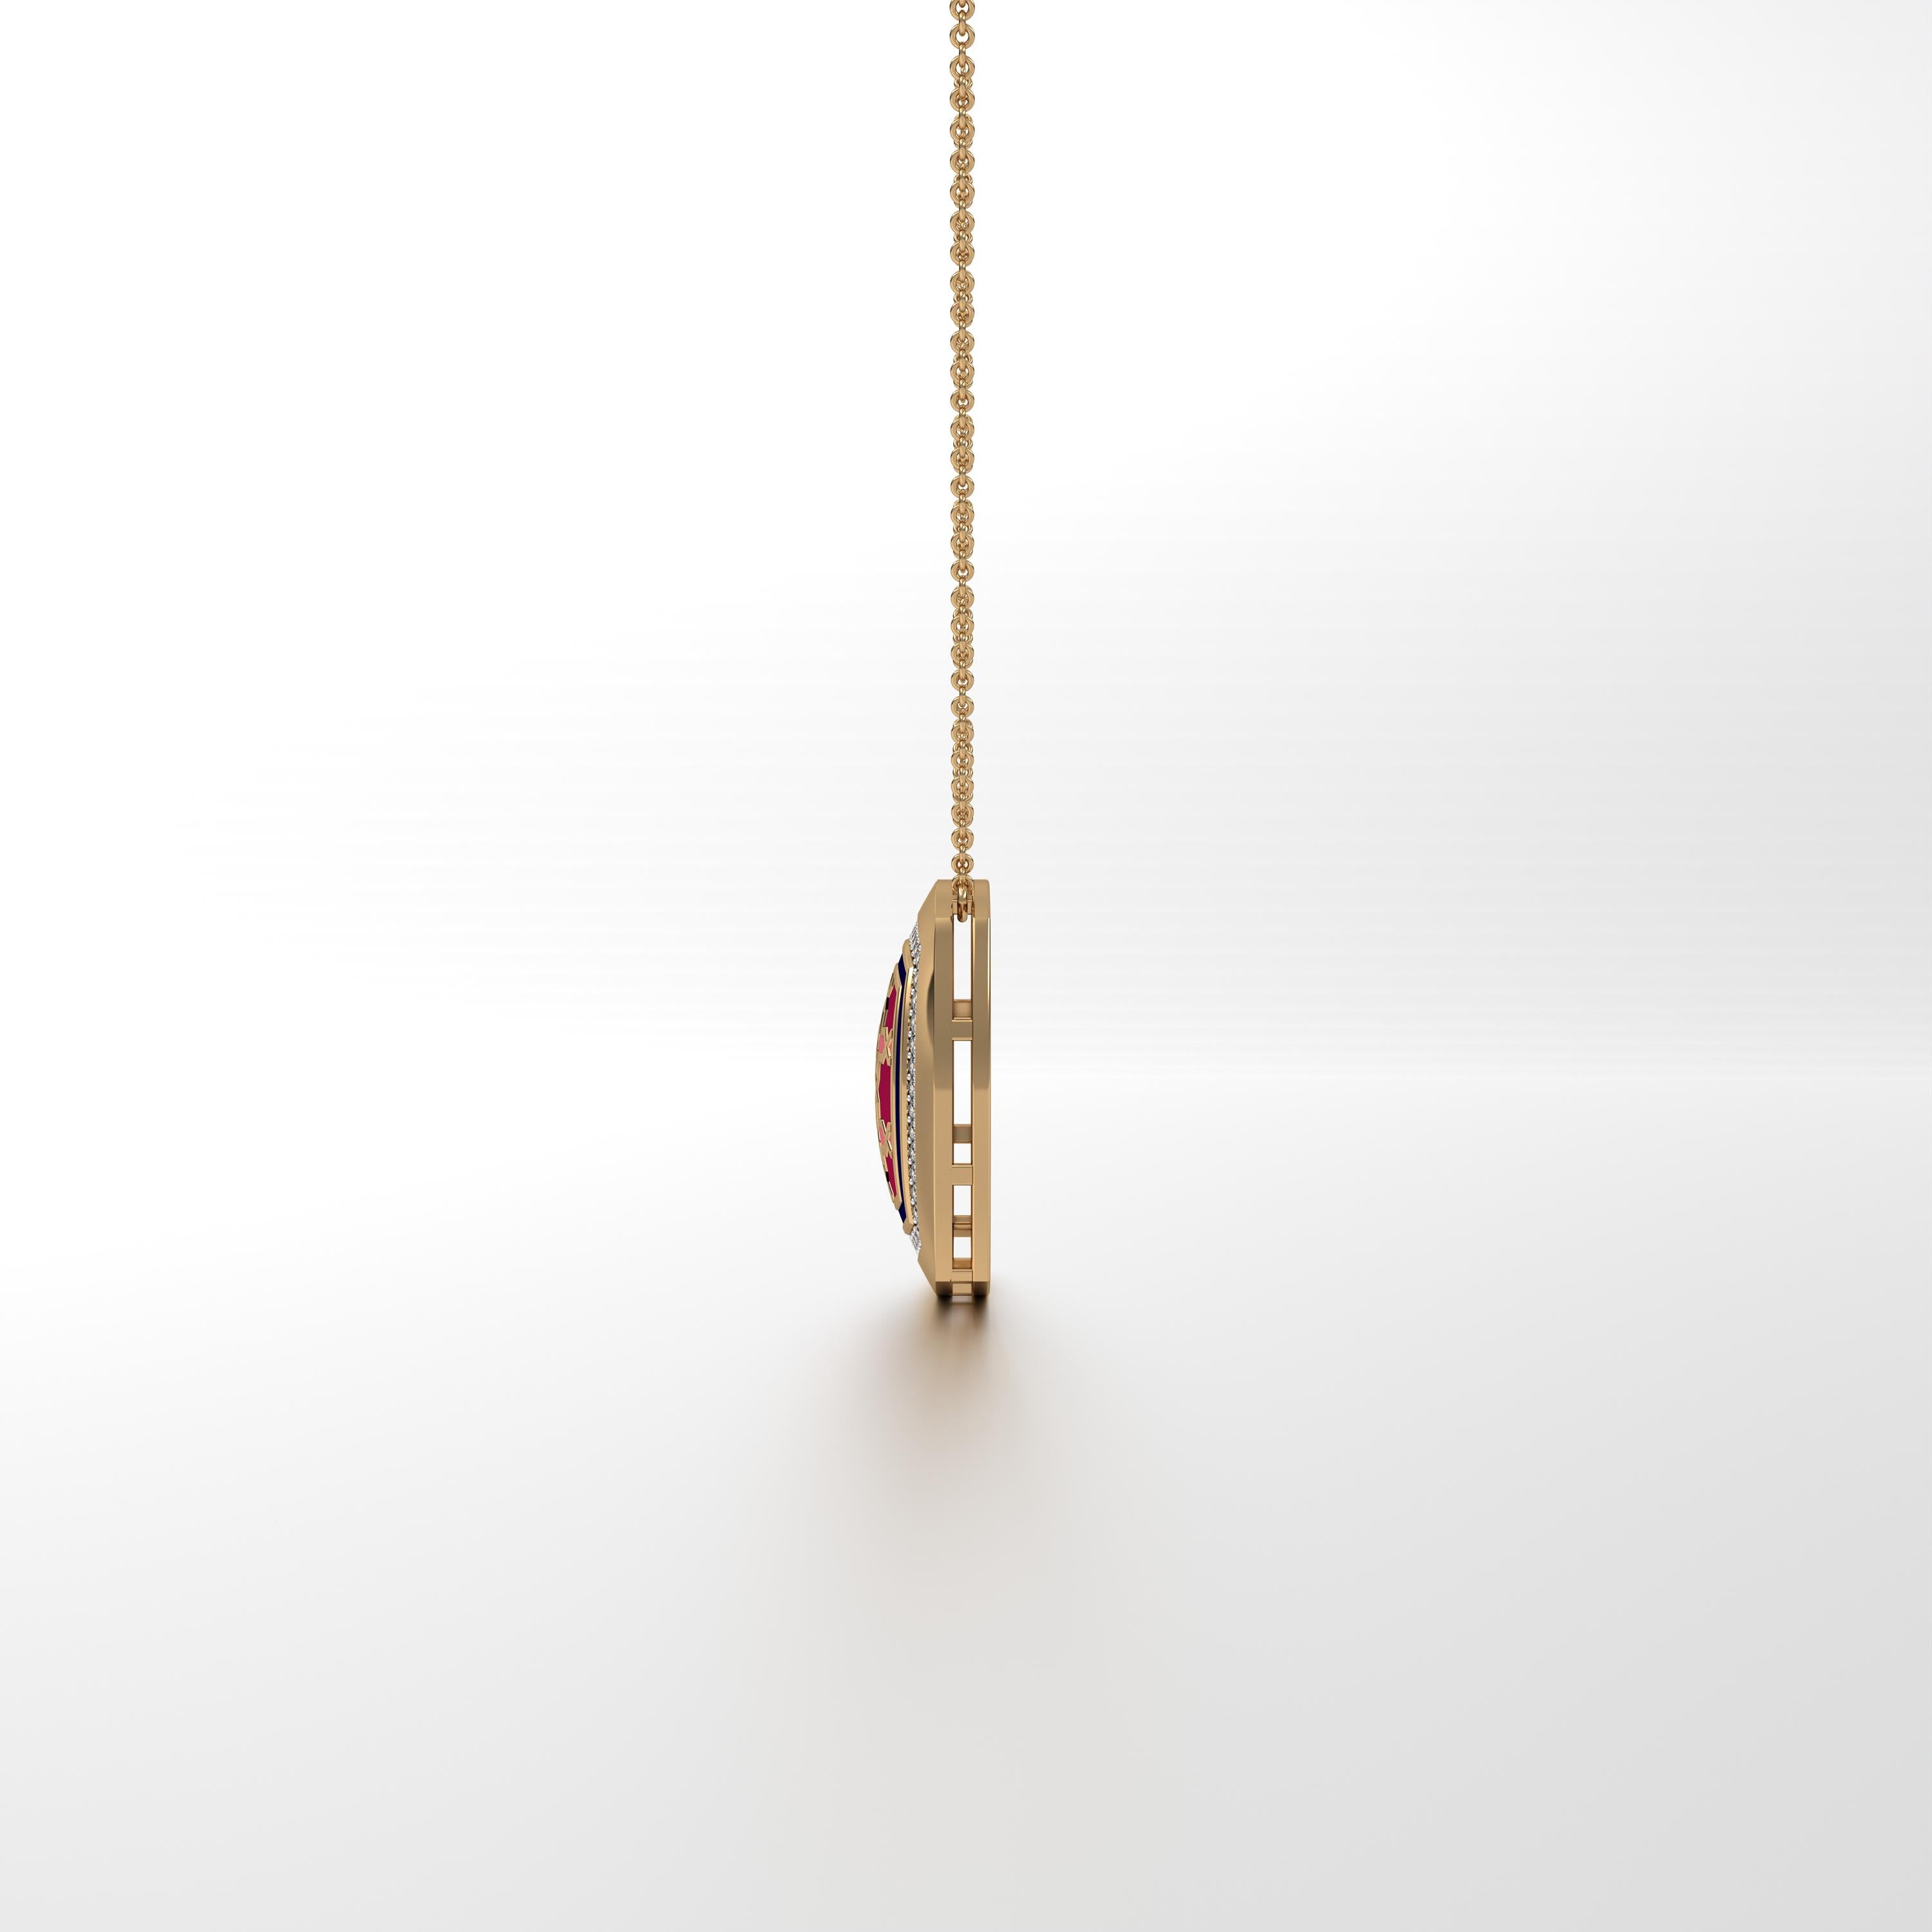 Aynur Cushion Pendant with Attached Chain Medium